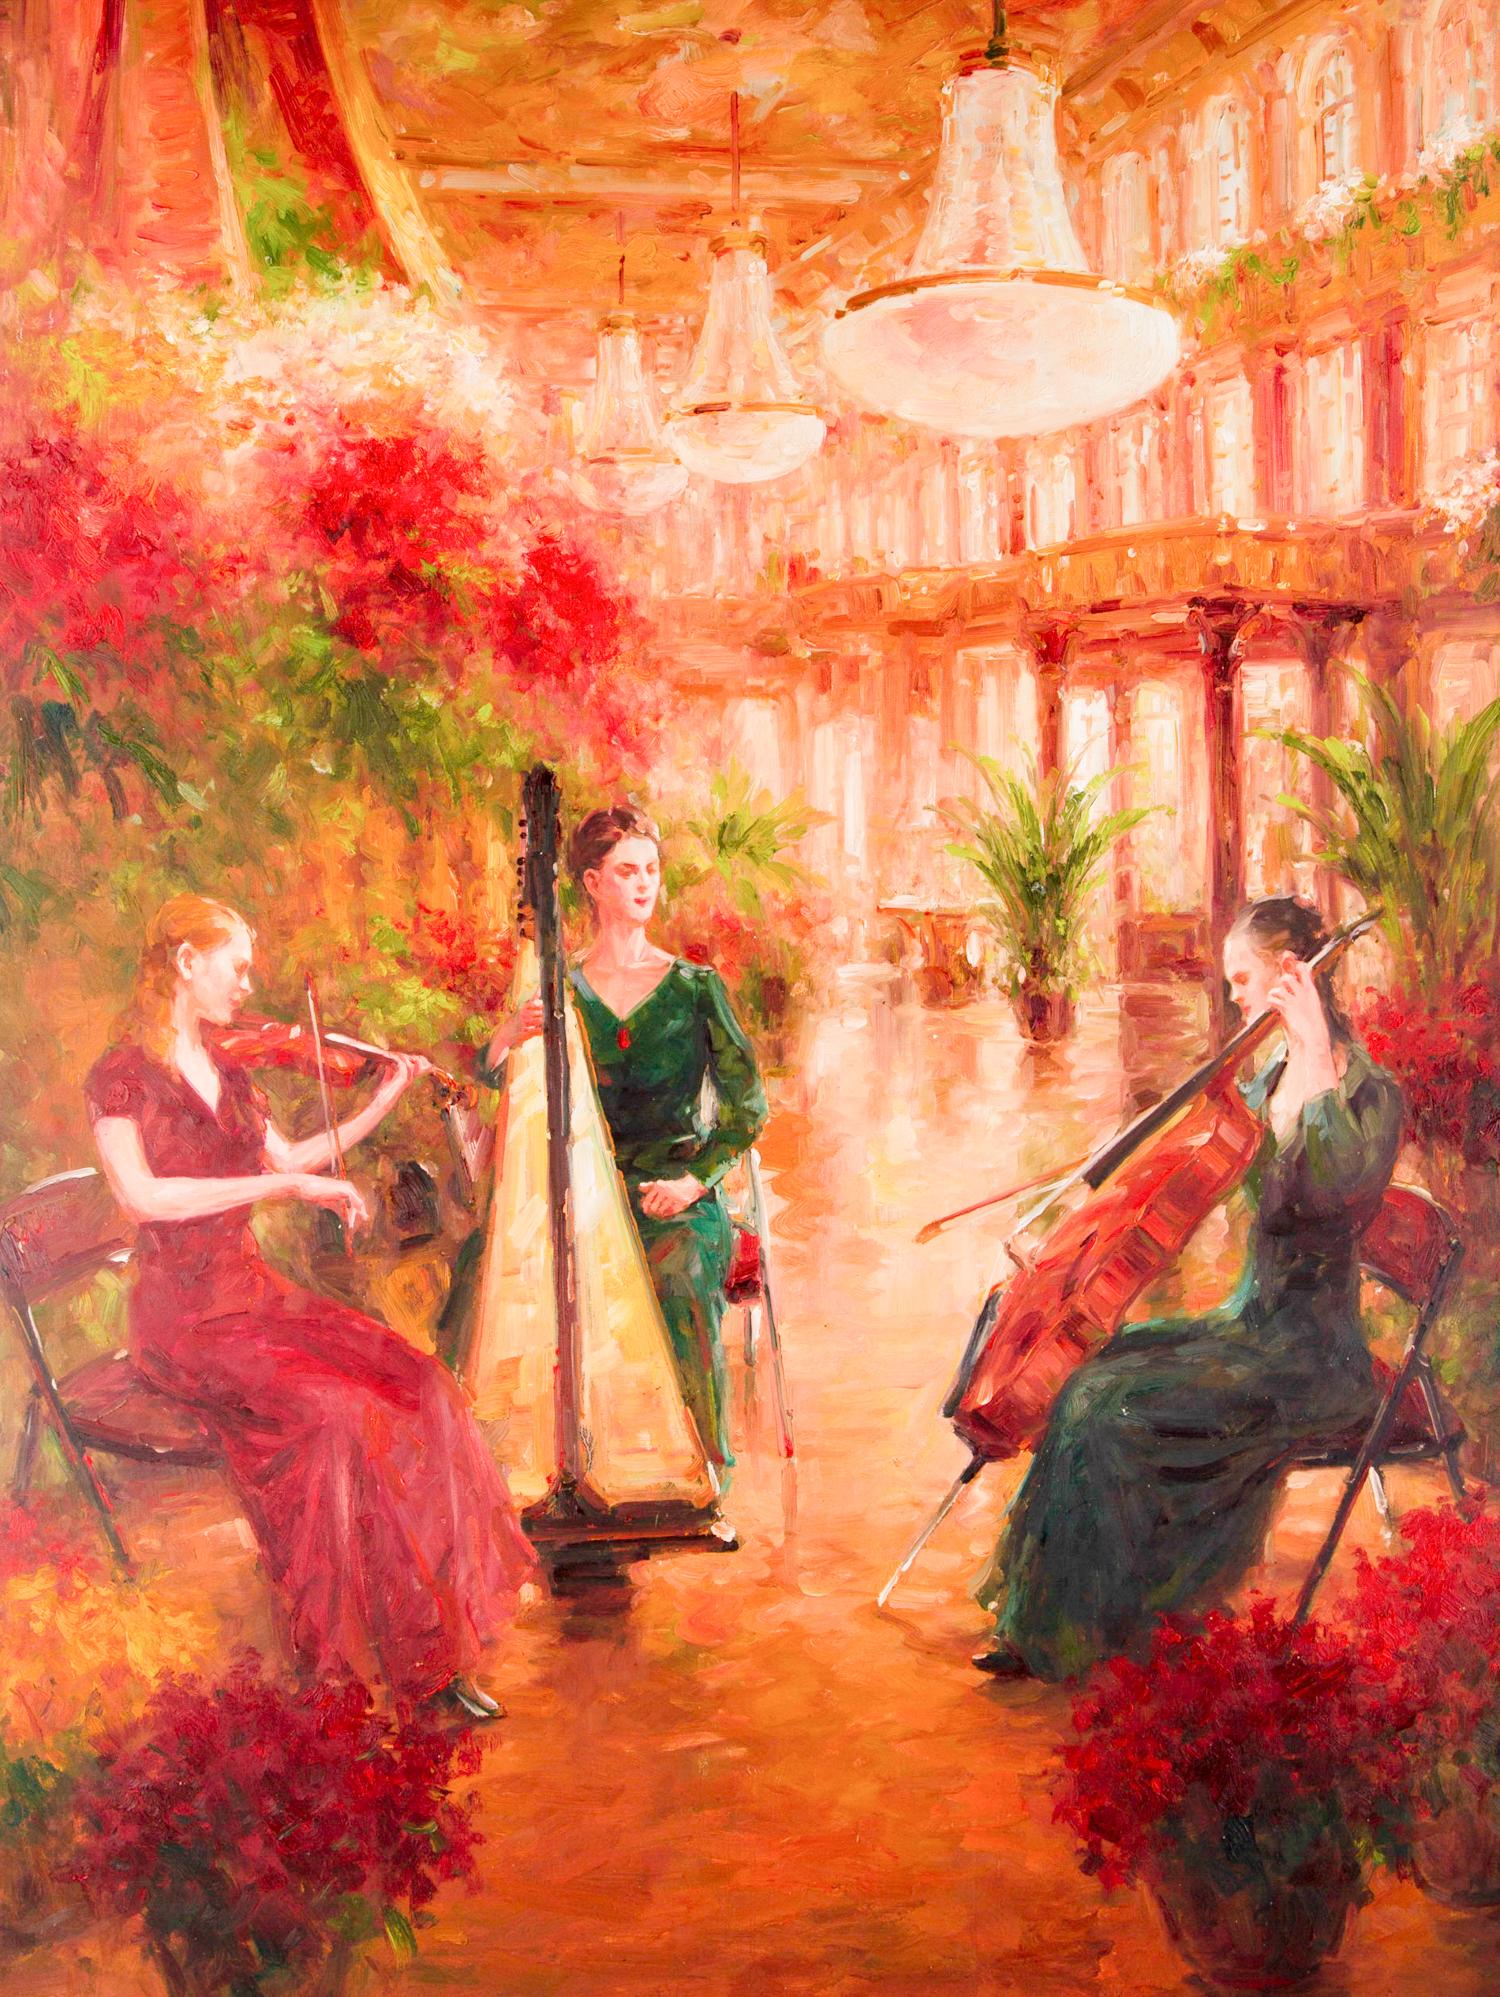  Title: Dance Ball 1
 Medium: Oil on canvas
 Size: 50.75 x 39.25 inches
 Frame: Framing options available!
 Condition: The painting is laid on the matt board and appears to be in excellent condition.
 
 Year: 2000 Circa
 Artist: Lin Hongdan
